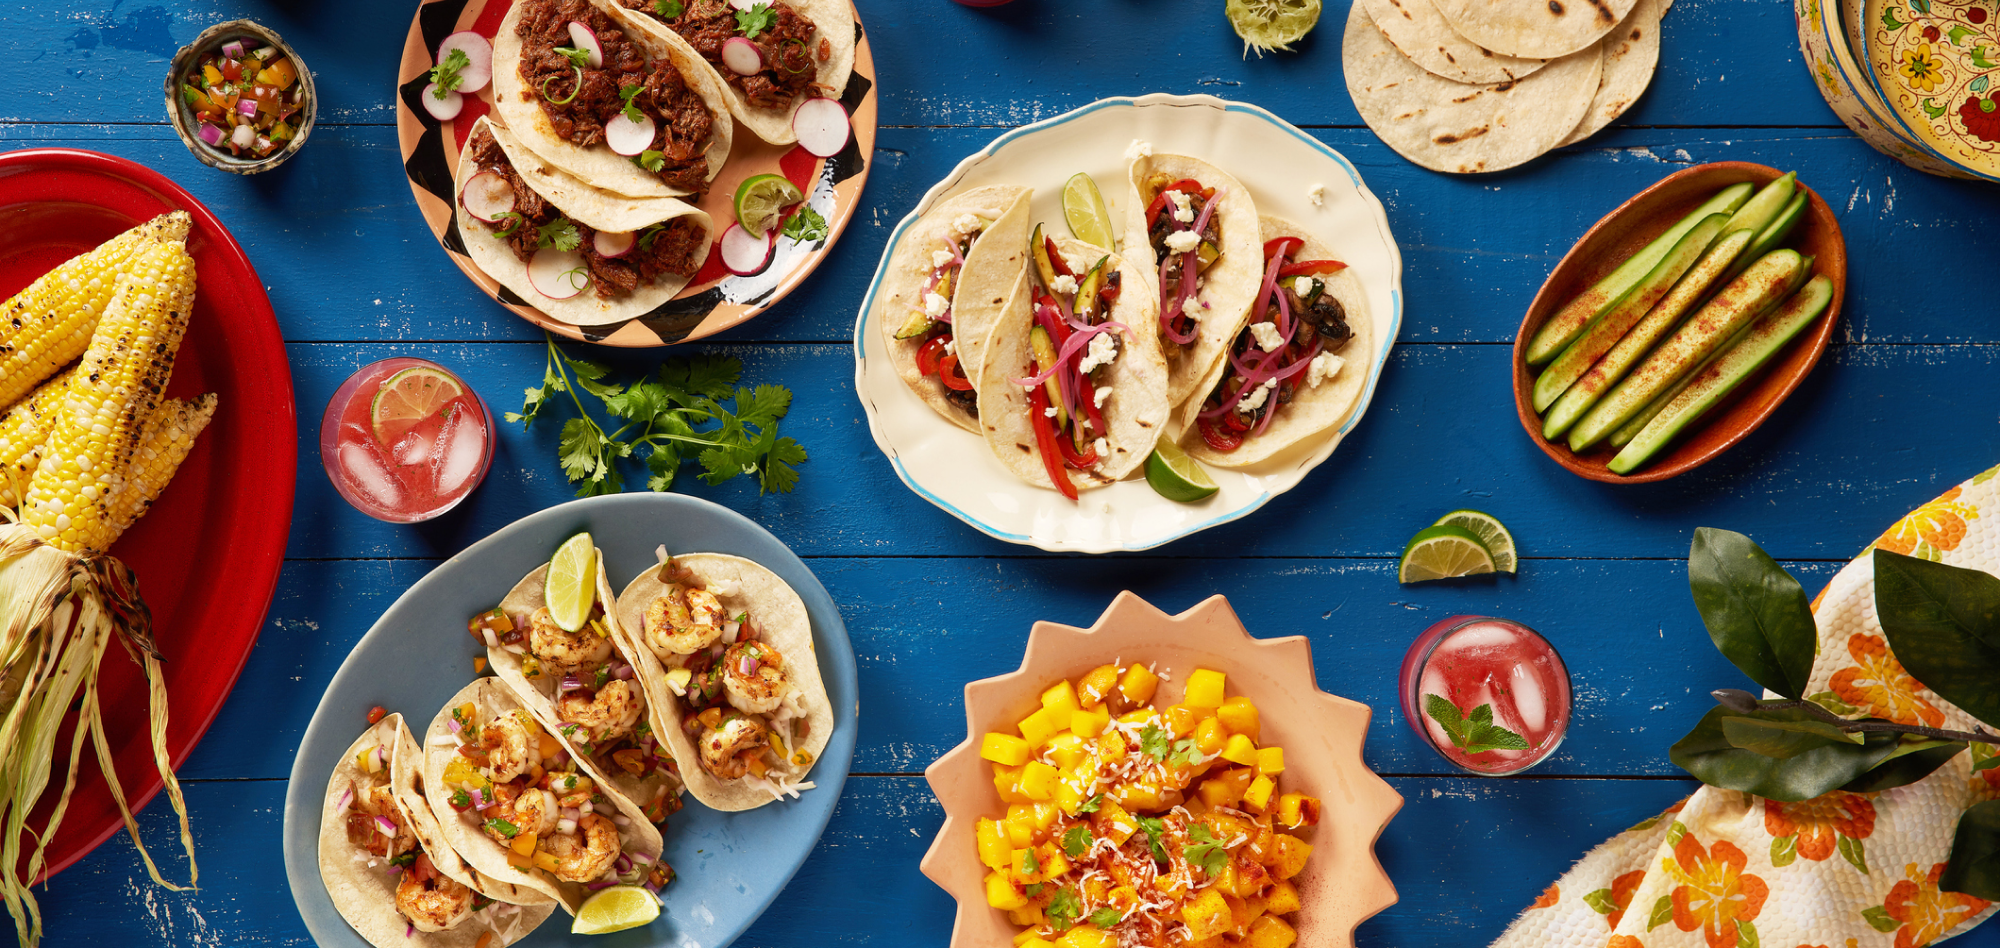 Restaurants preparing for Cinco de Mayo can increase average order sizes with these upsell ideas.